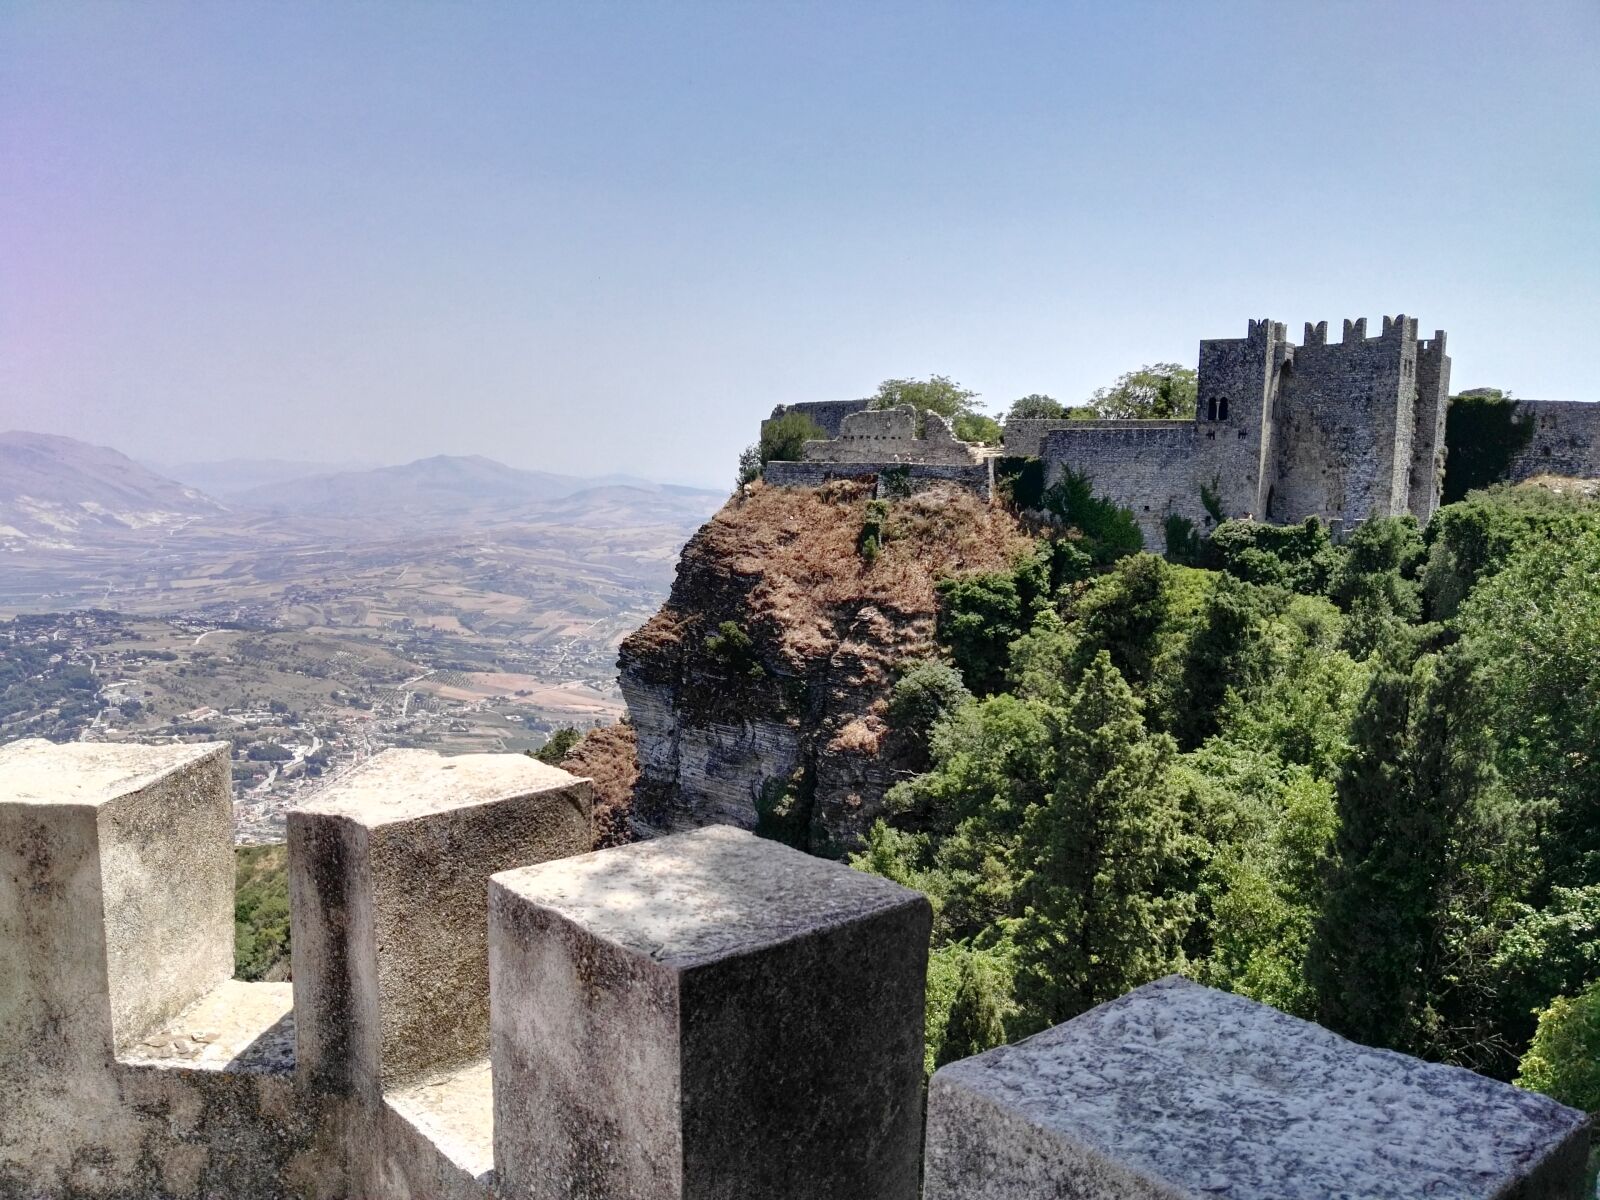 HUAWEI GX8 sample photo. Erice, sicily, belvedere photography